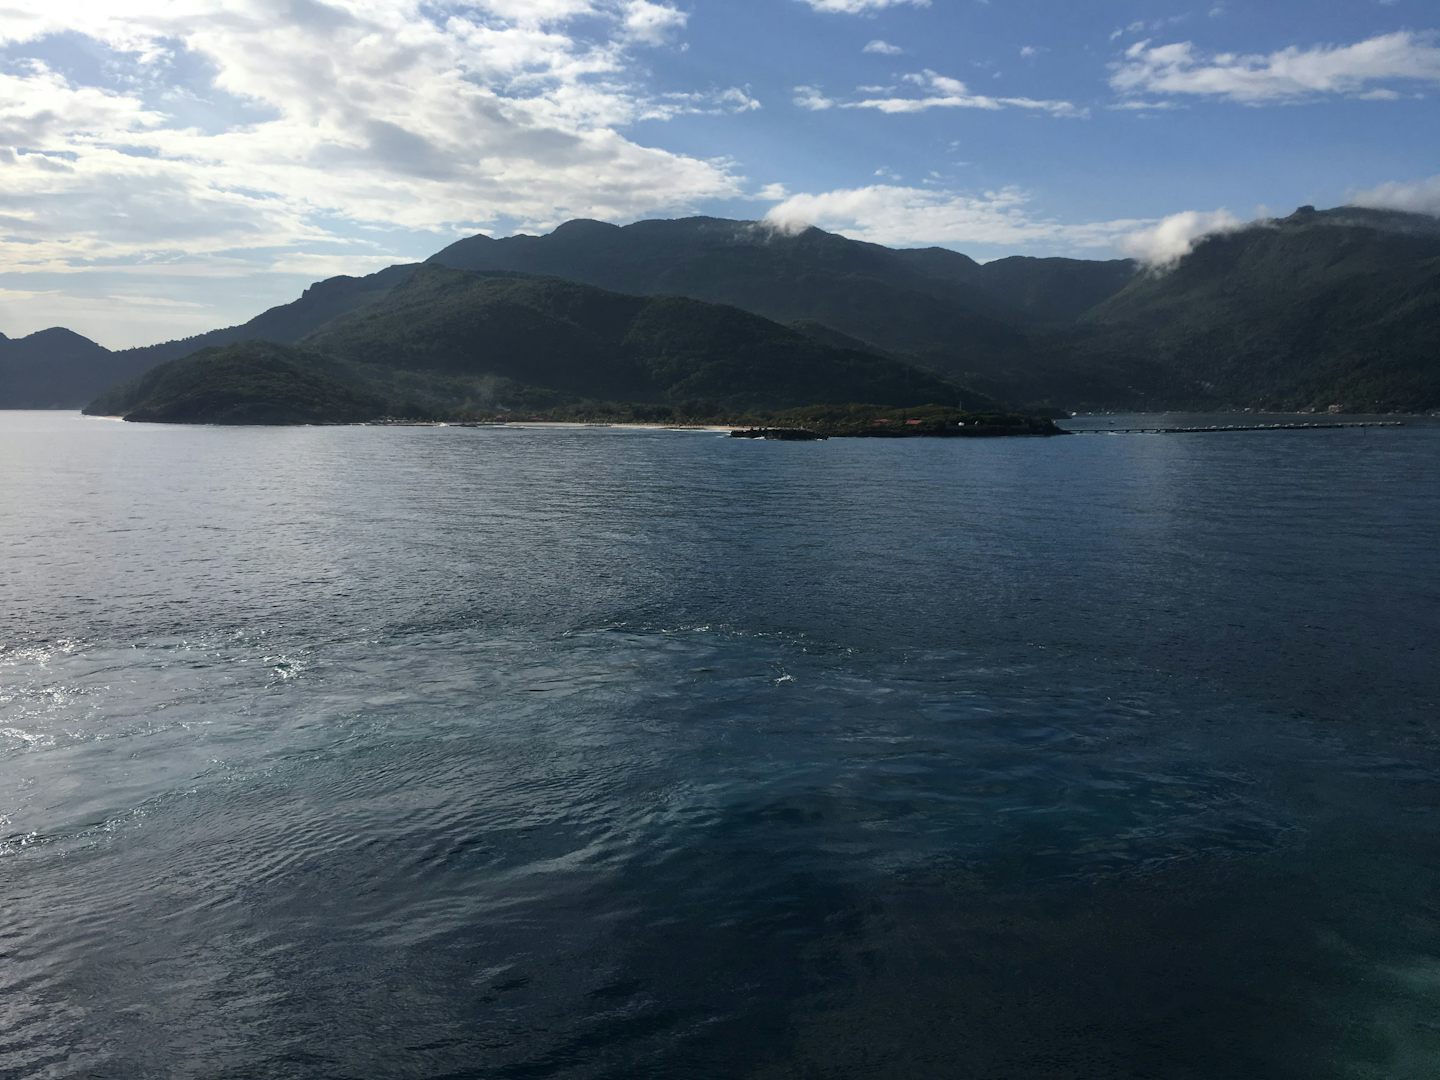 Coming into Labadee on the ship